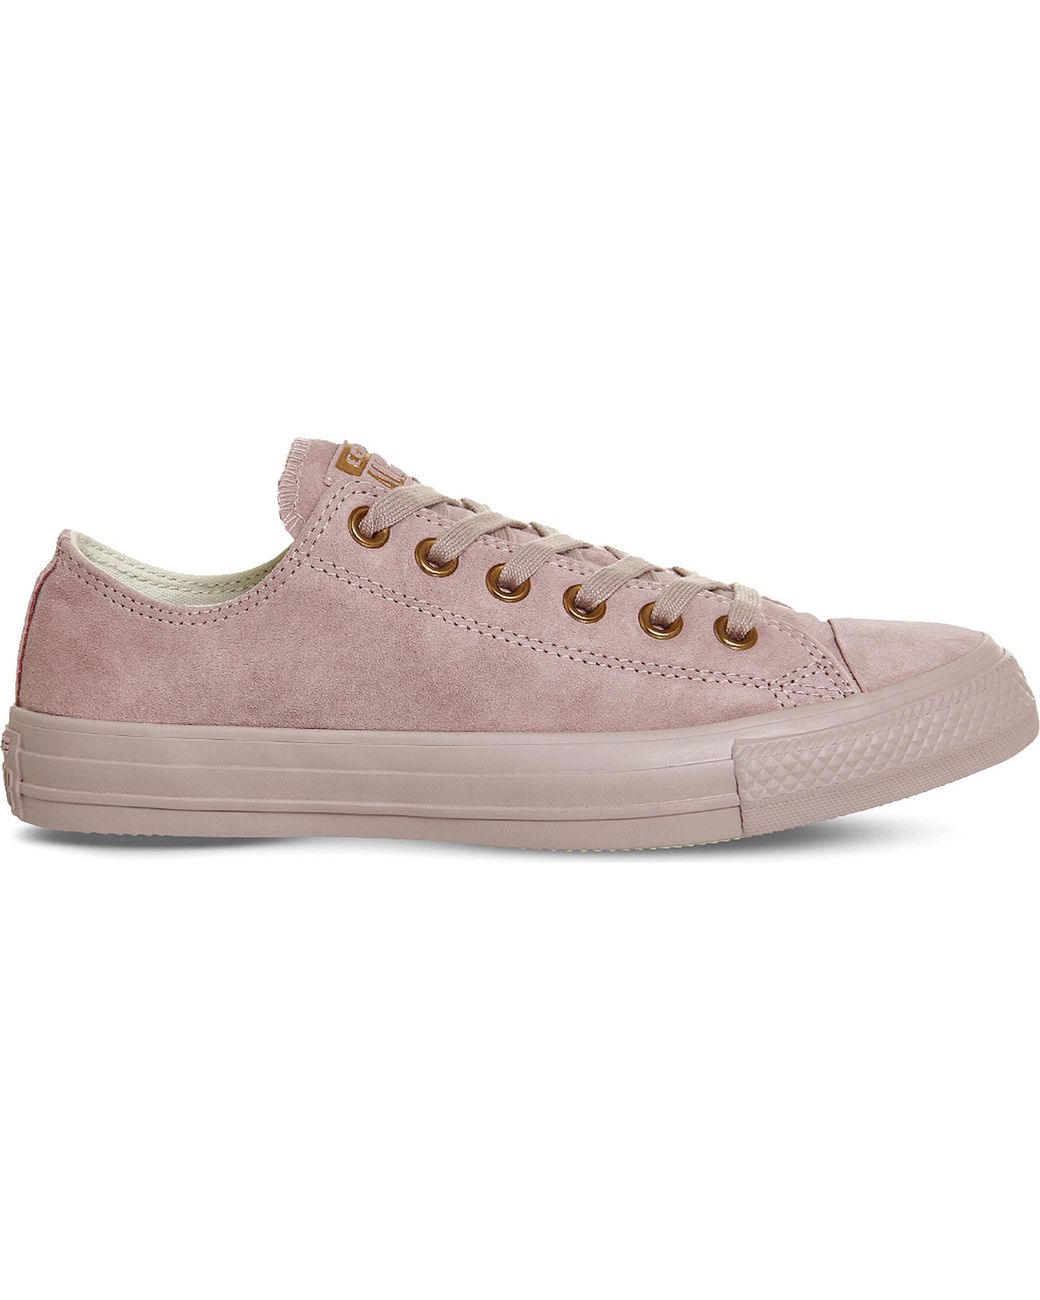 Converse All Star Suede Low-Top Sneakers in Lilac Rose Gold (Pink) | Lyst